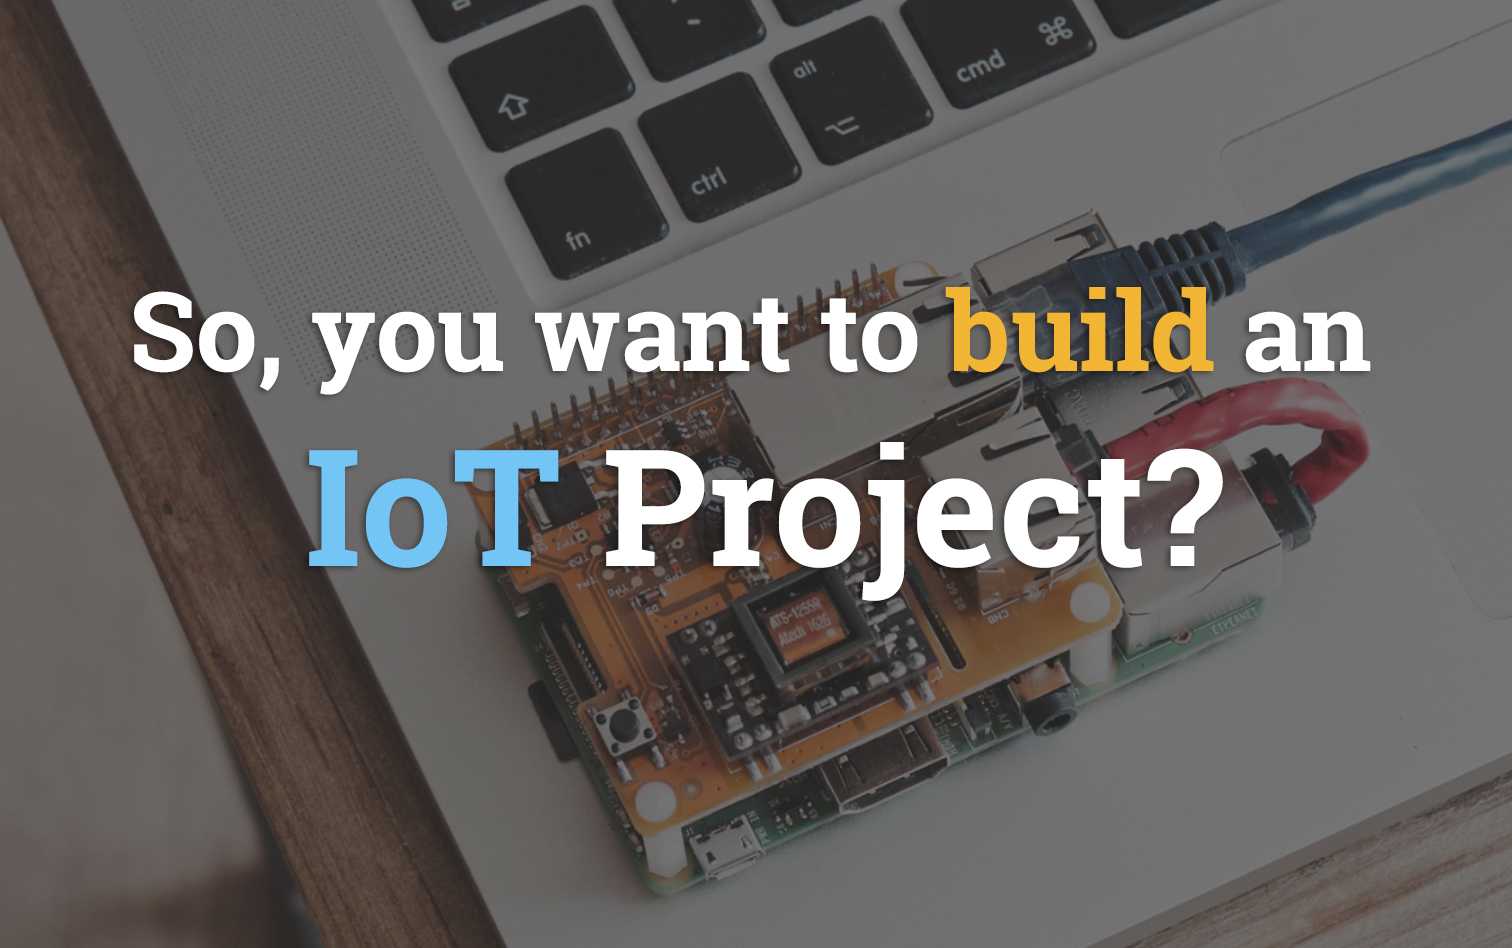 So, you want to build an IoT Project?